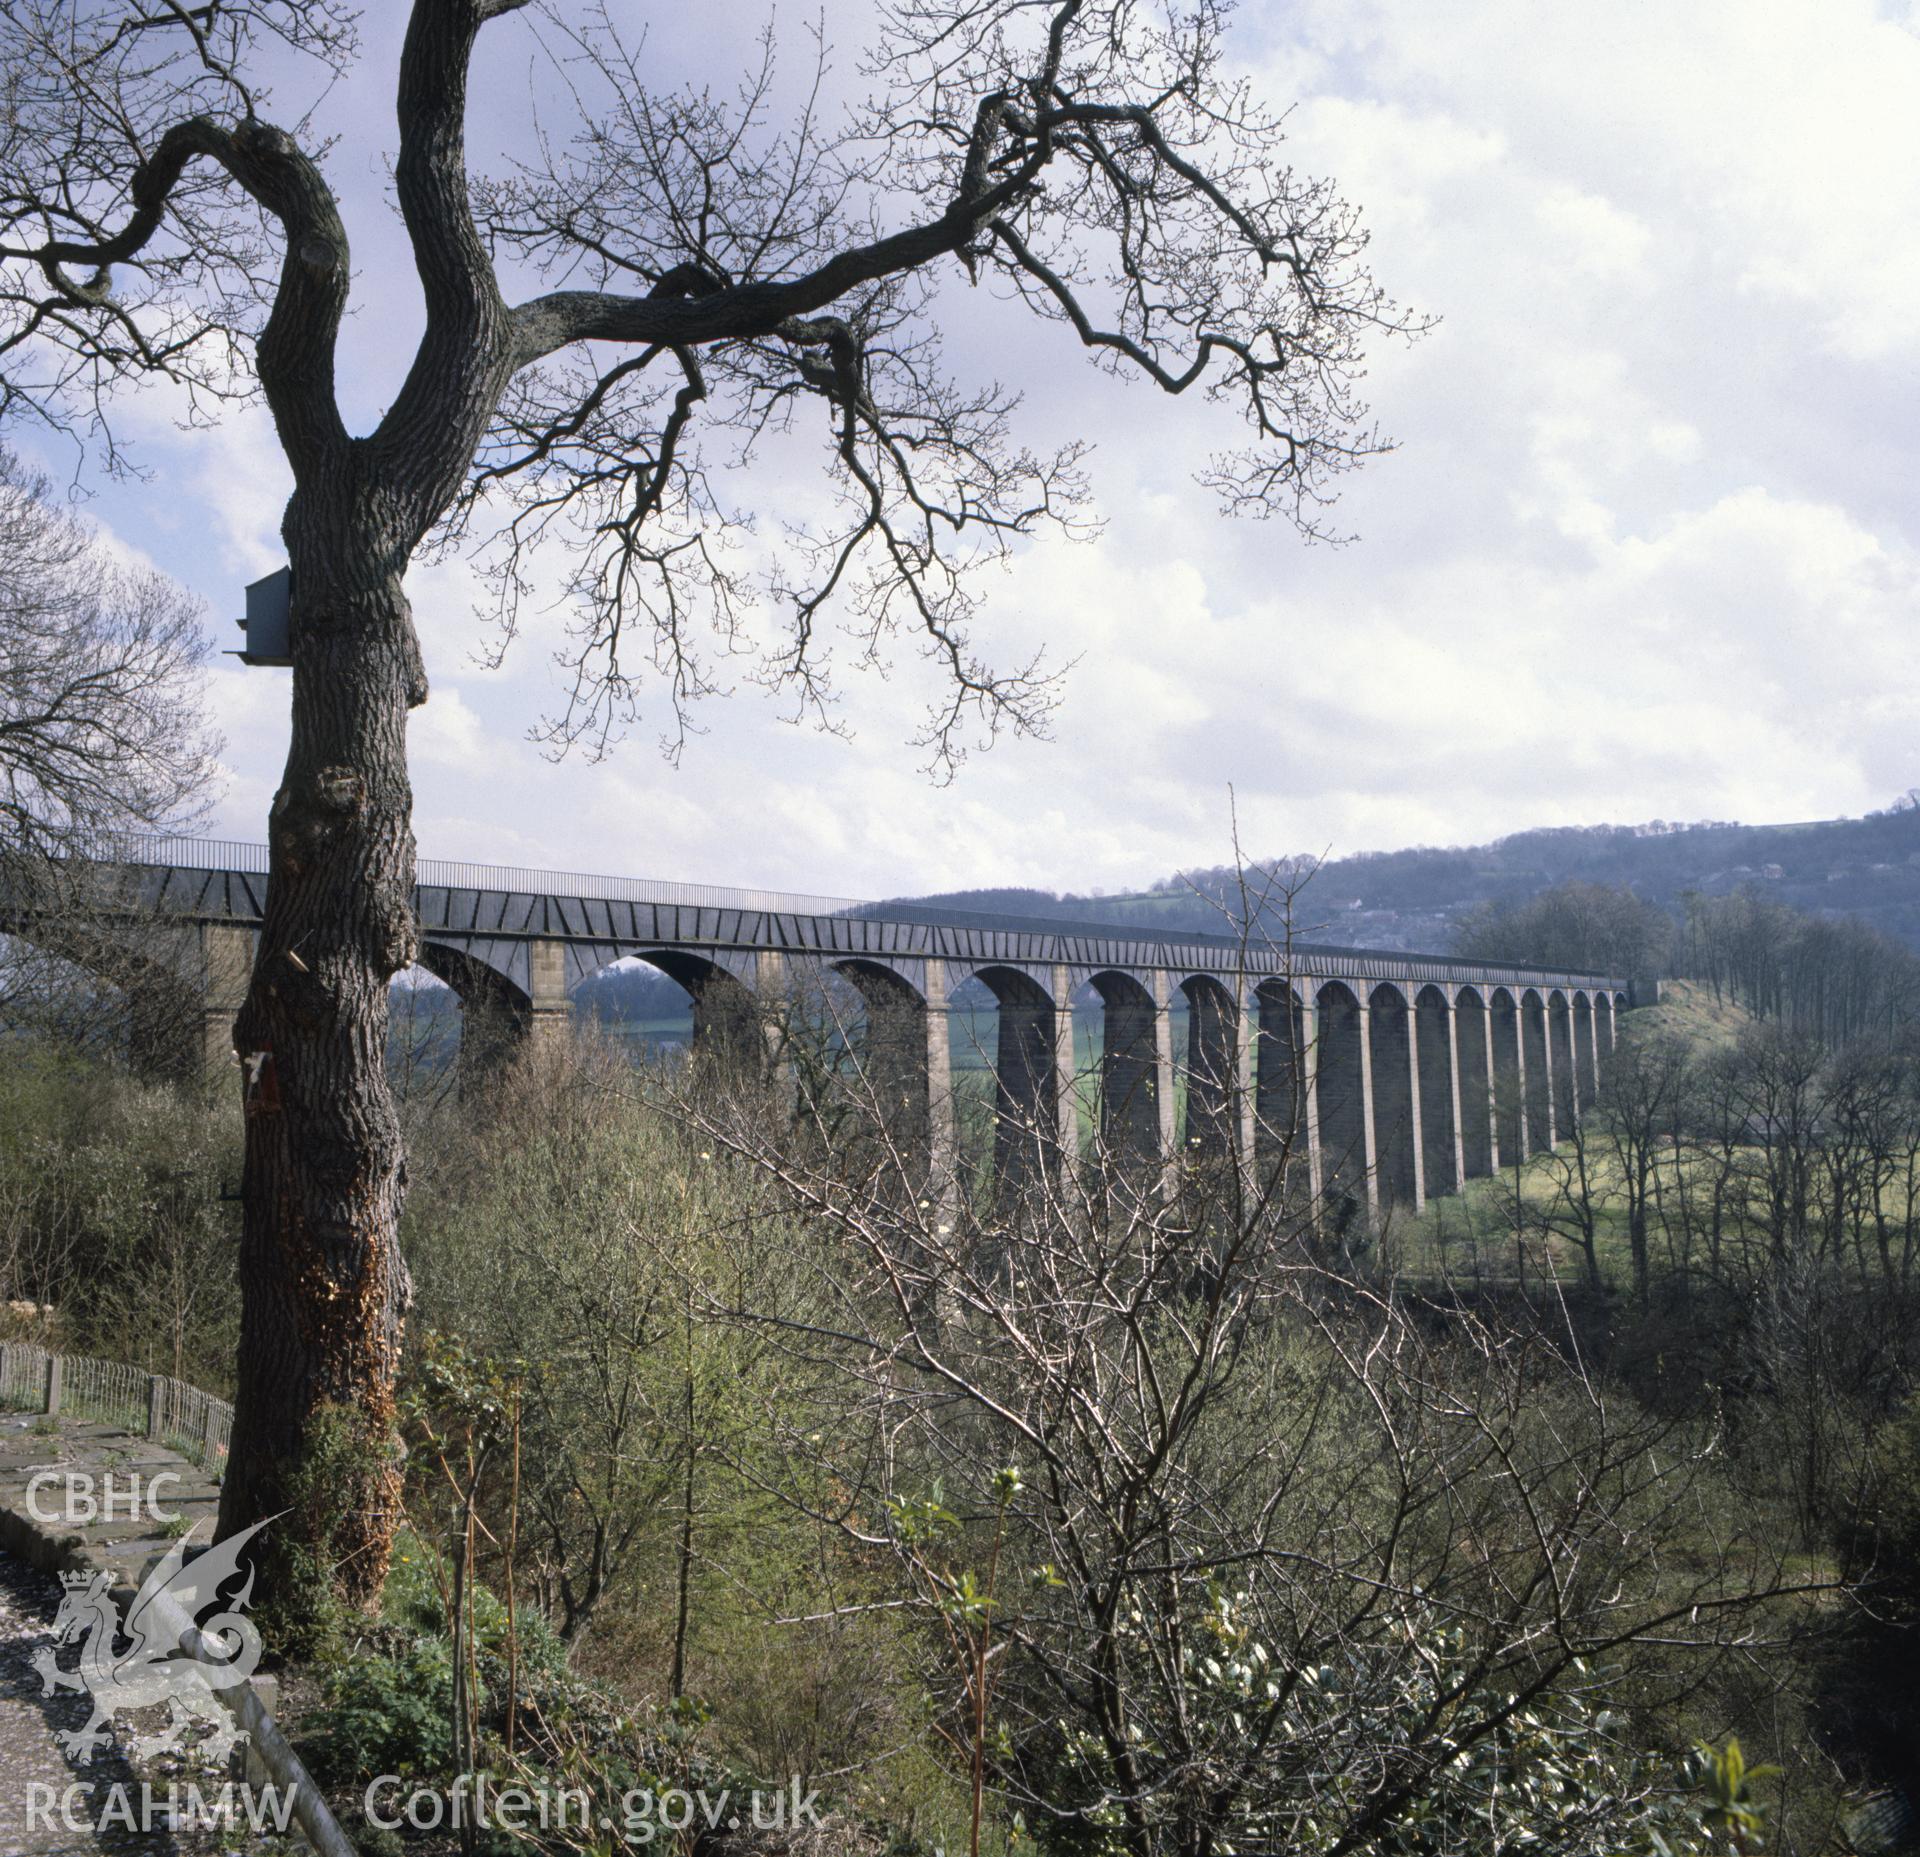 1 colour transparency showing view of Pontcysyllte Aqueduct, undated; collated by the former Central Office of Information.